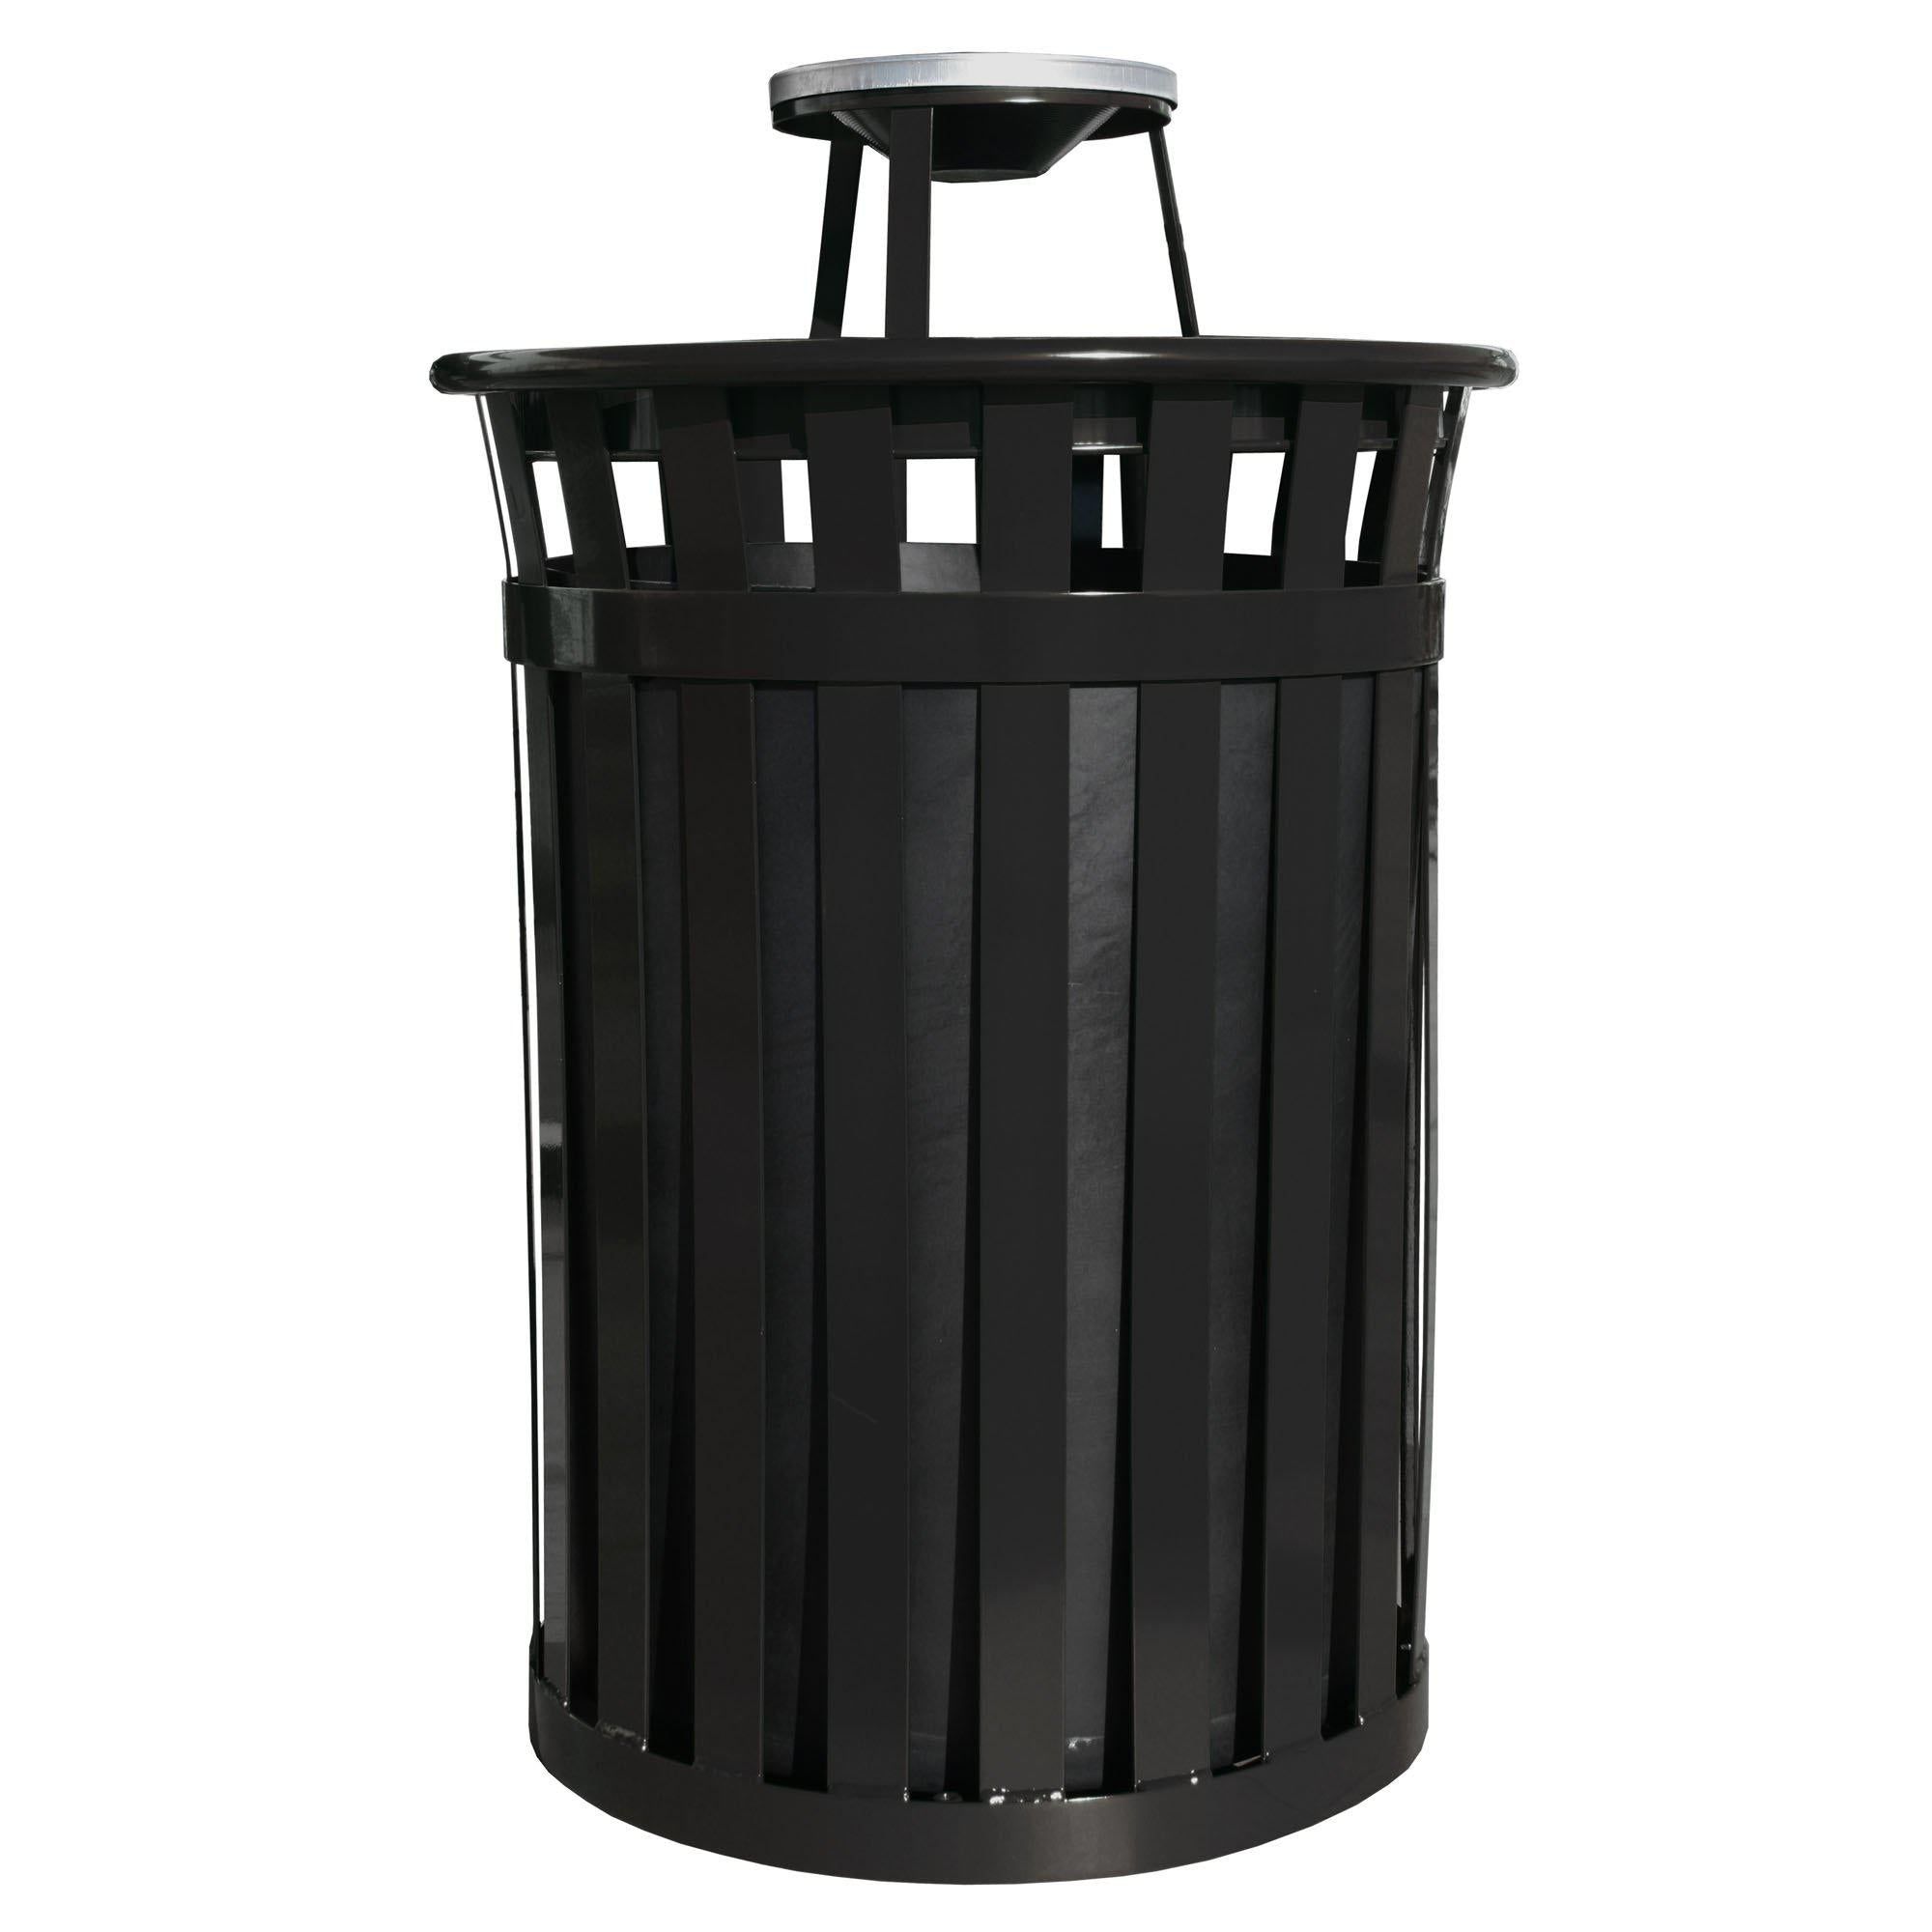 Oakley Collection Large Capacity Outdoor Trash Receptacle with Ash Top, 50-Gallon Capacity